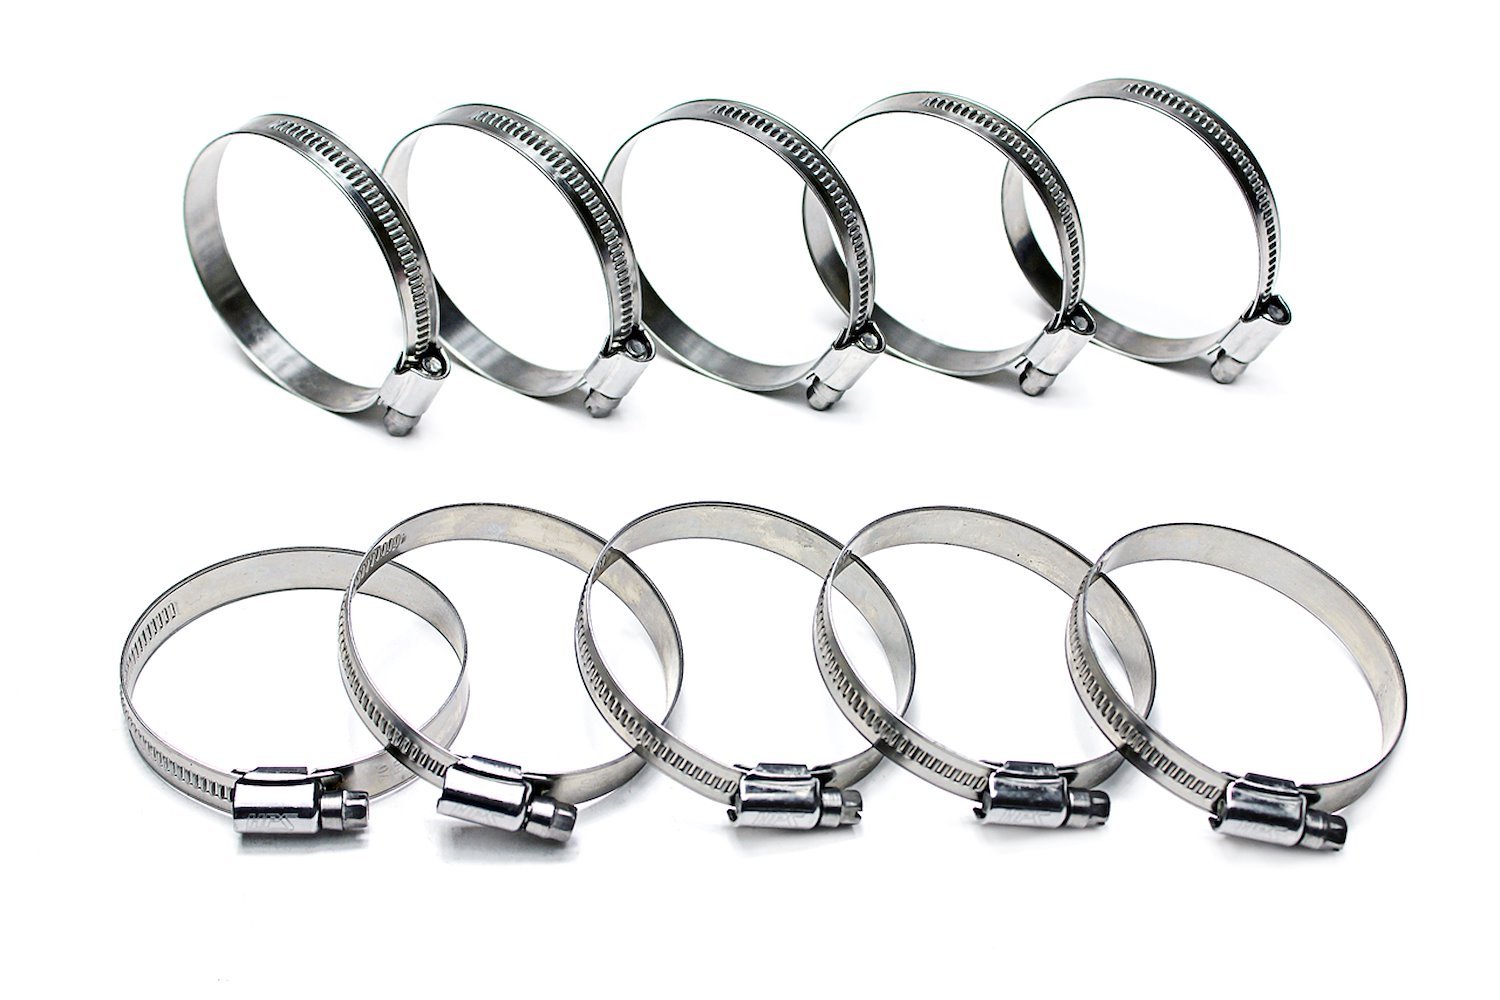 EMSC-10-16x10 Embossed Hose Clamp, Stainless Steel Embossed Hose Clamp, Size #4, Effective Range: 7/16 in.- 11/16 in., 10Pc